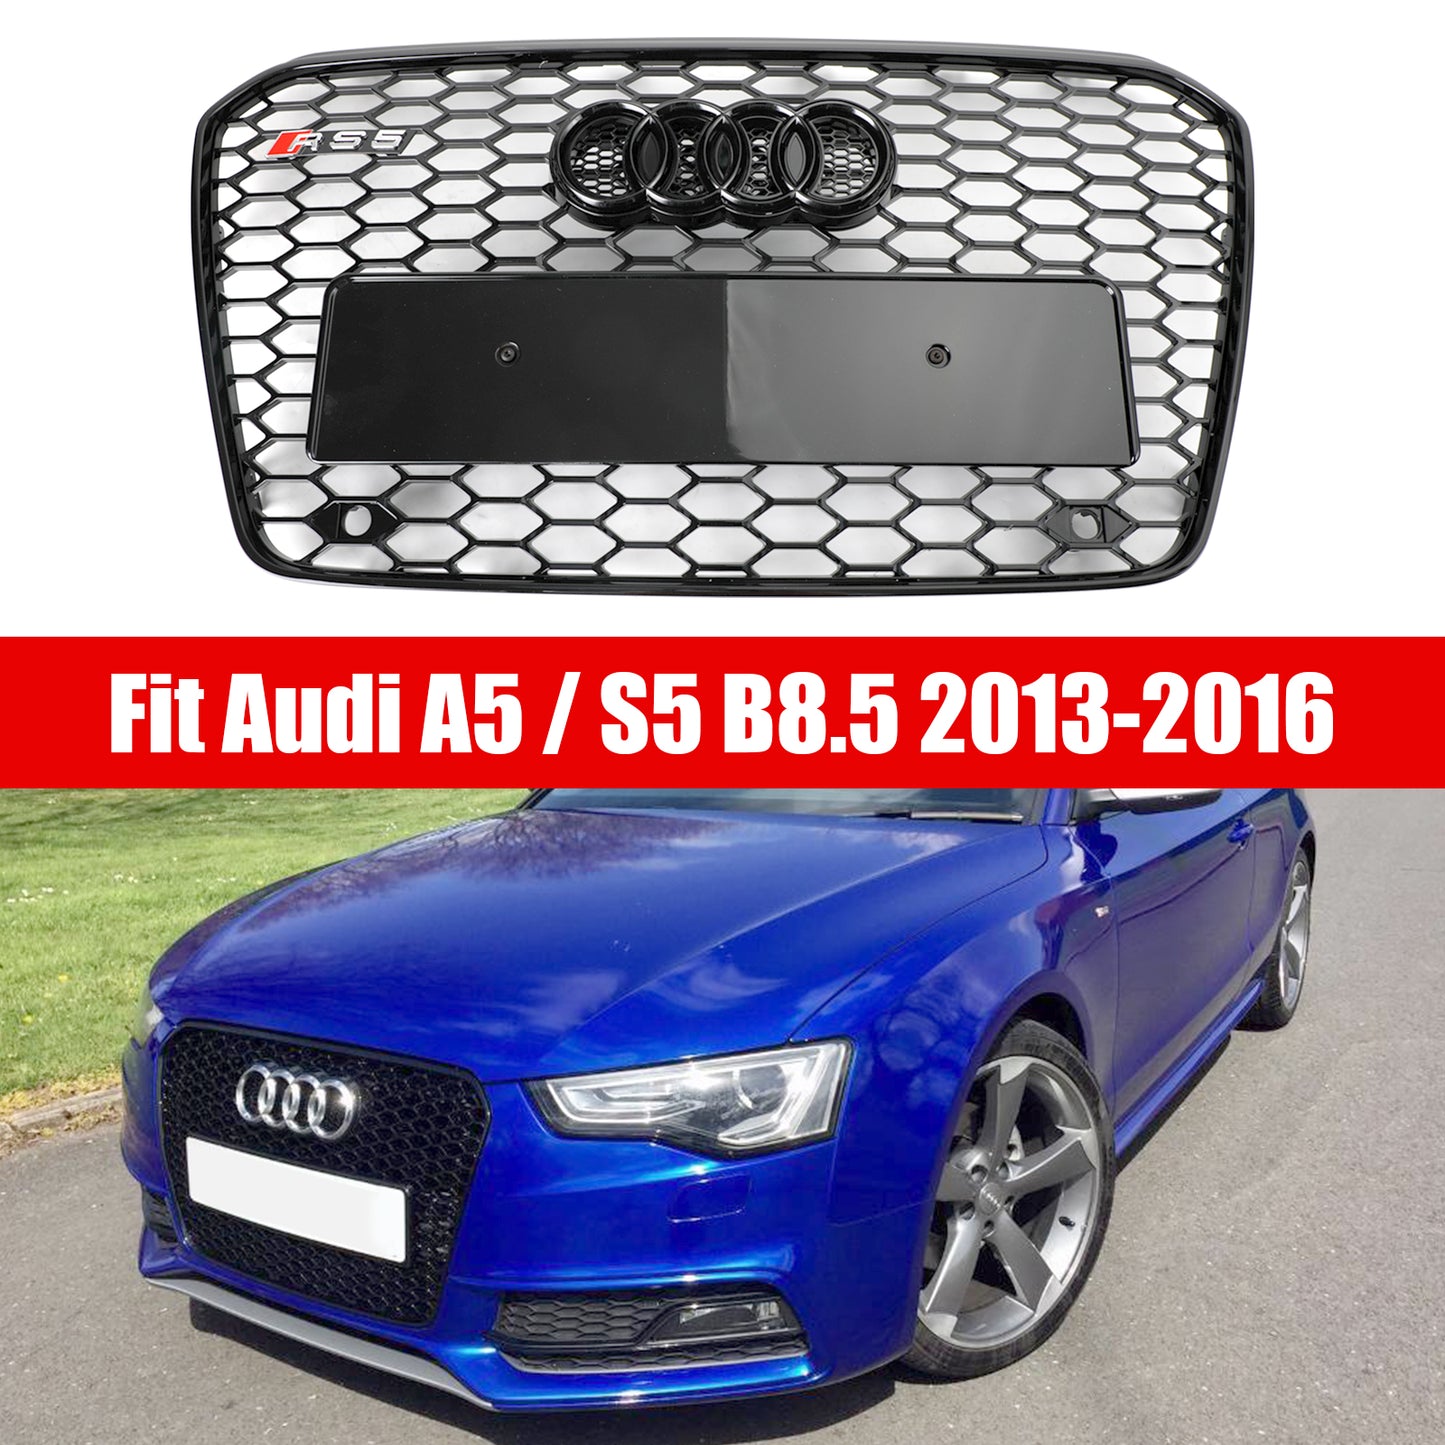 2013-2016 Audi A5 S5 B8.5 Honeycomb Hex Mesh Front Bumper Car Grille RS5 Style